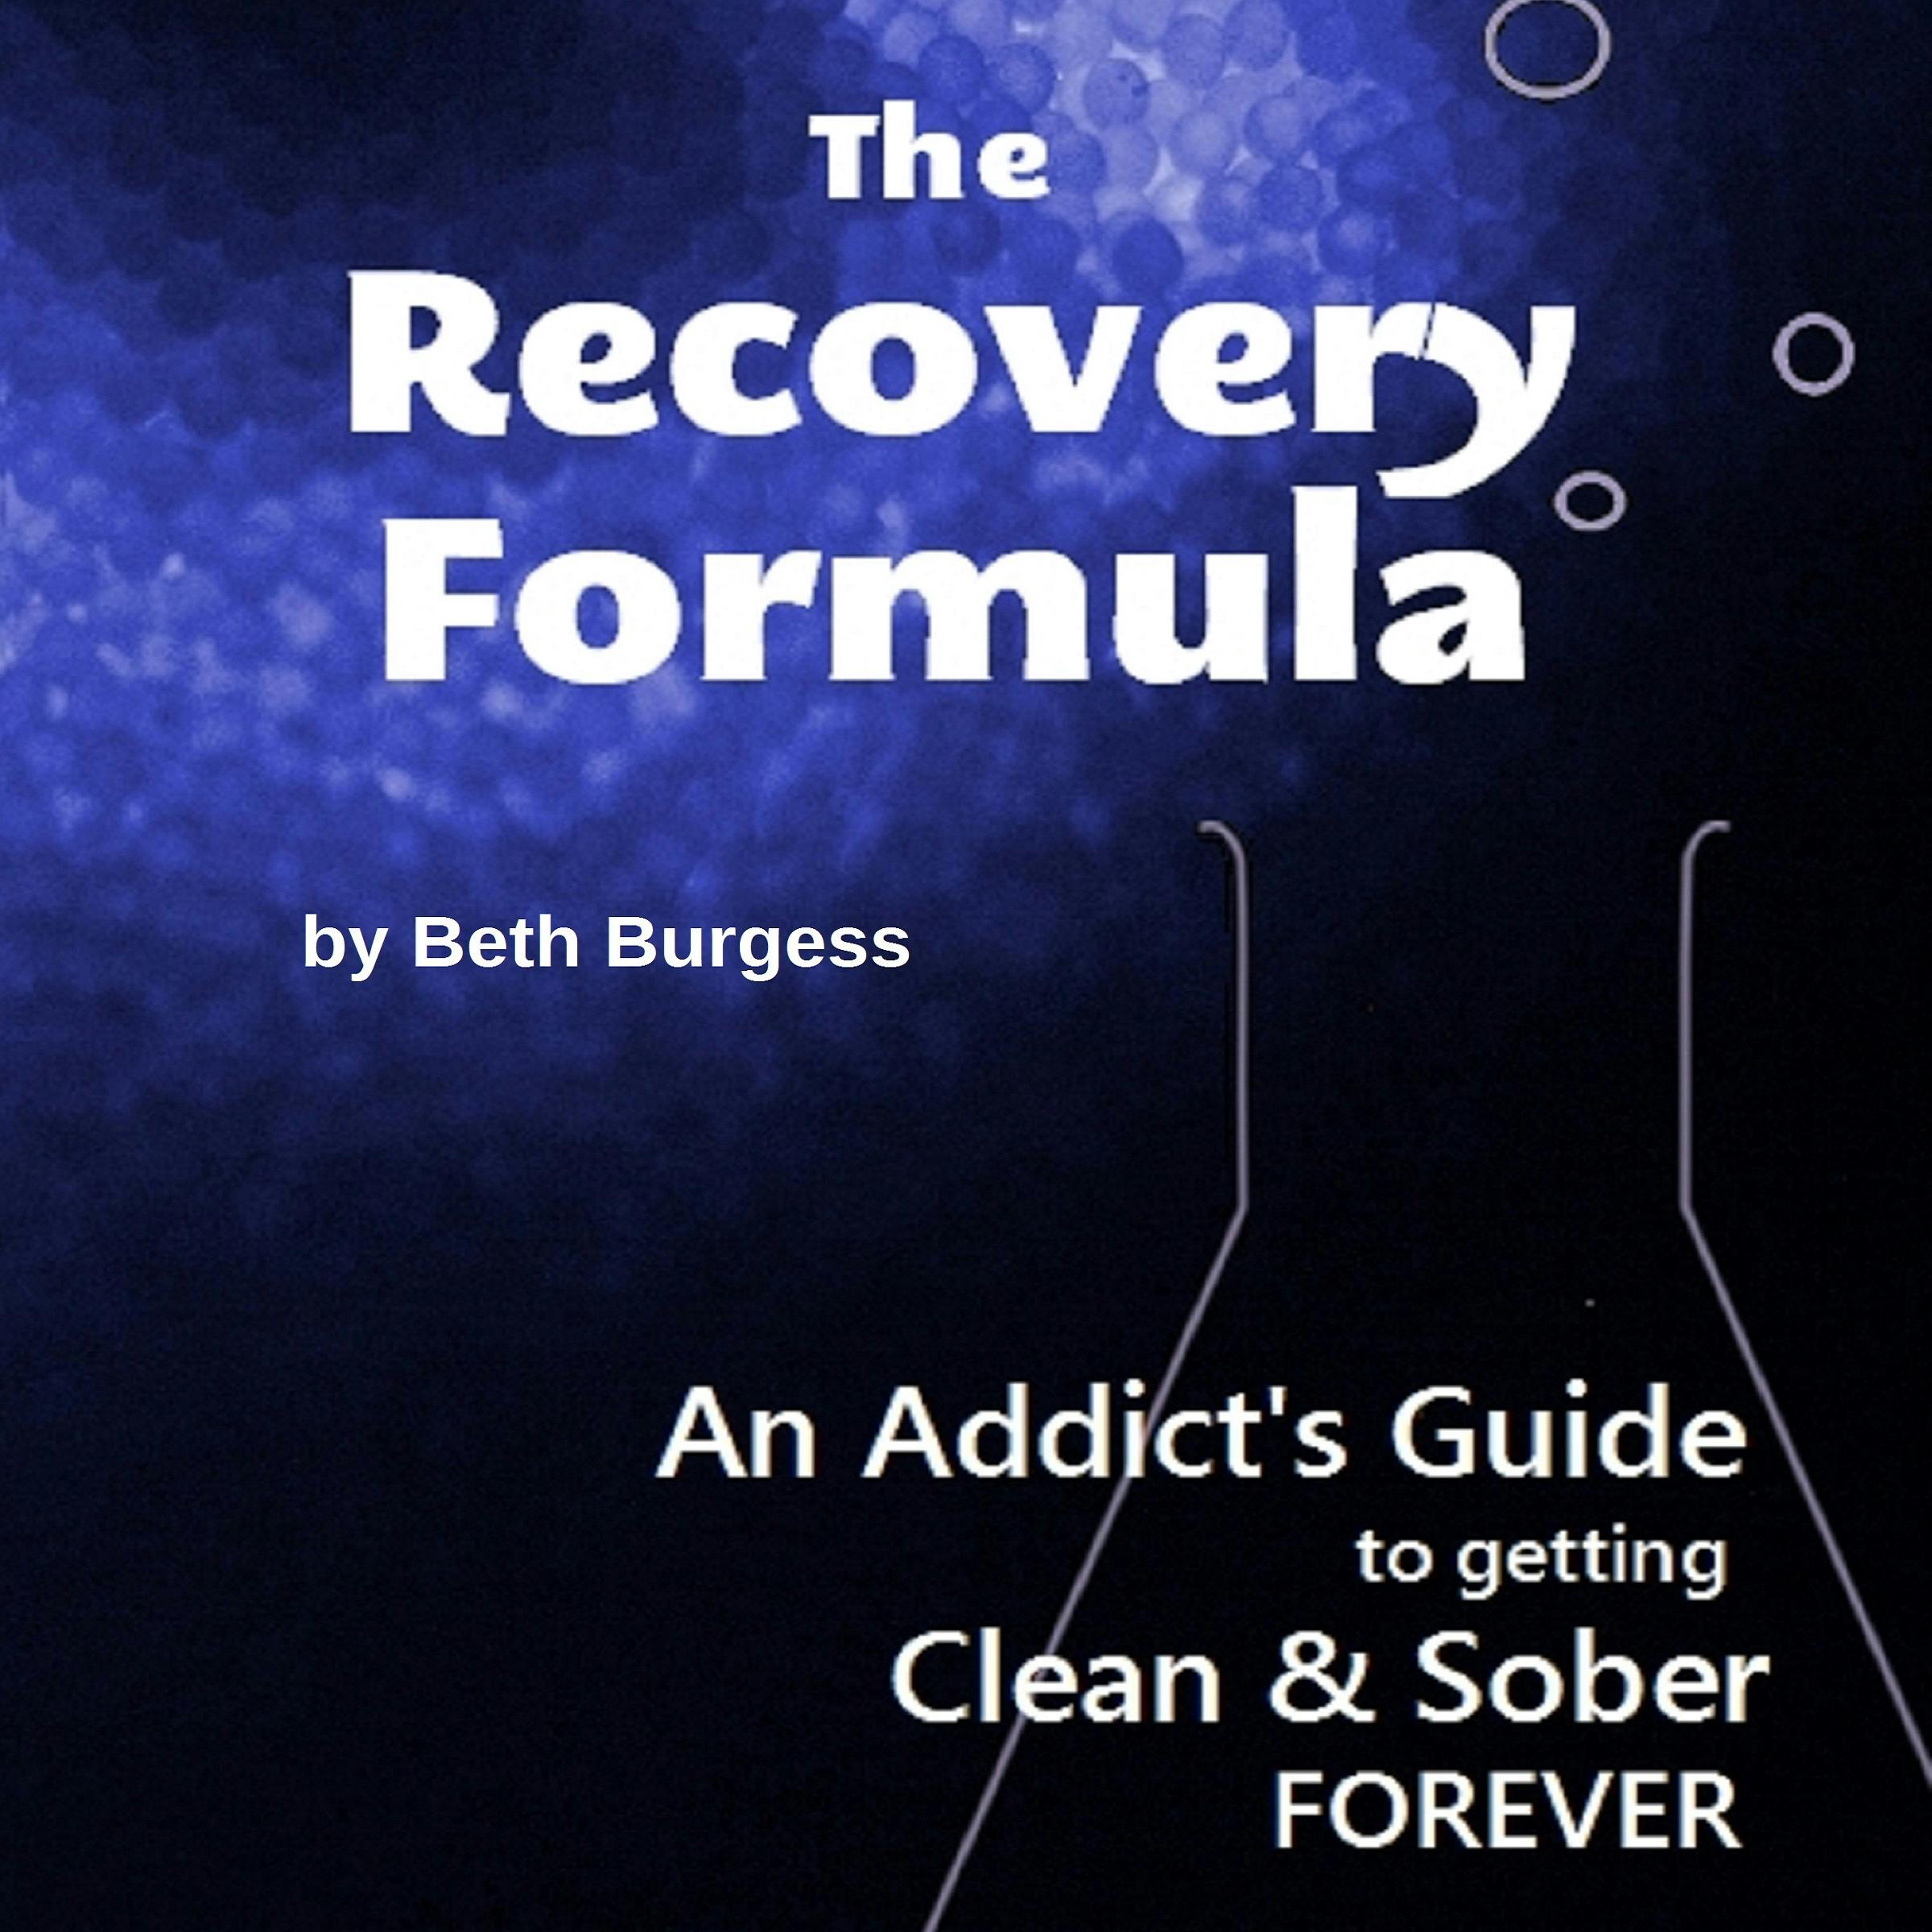 The Recovery Formula: An Addict's Guide to Getting Clean & Sober FOREVER - Beth Burgess